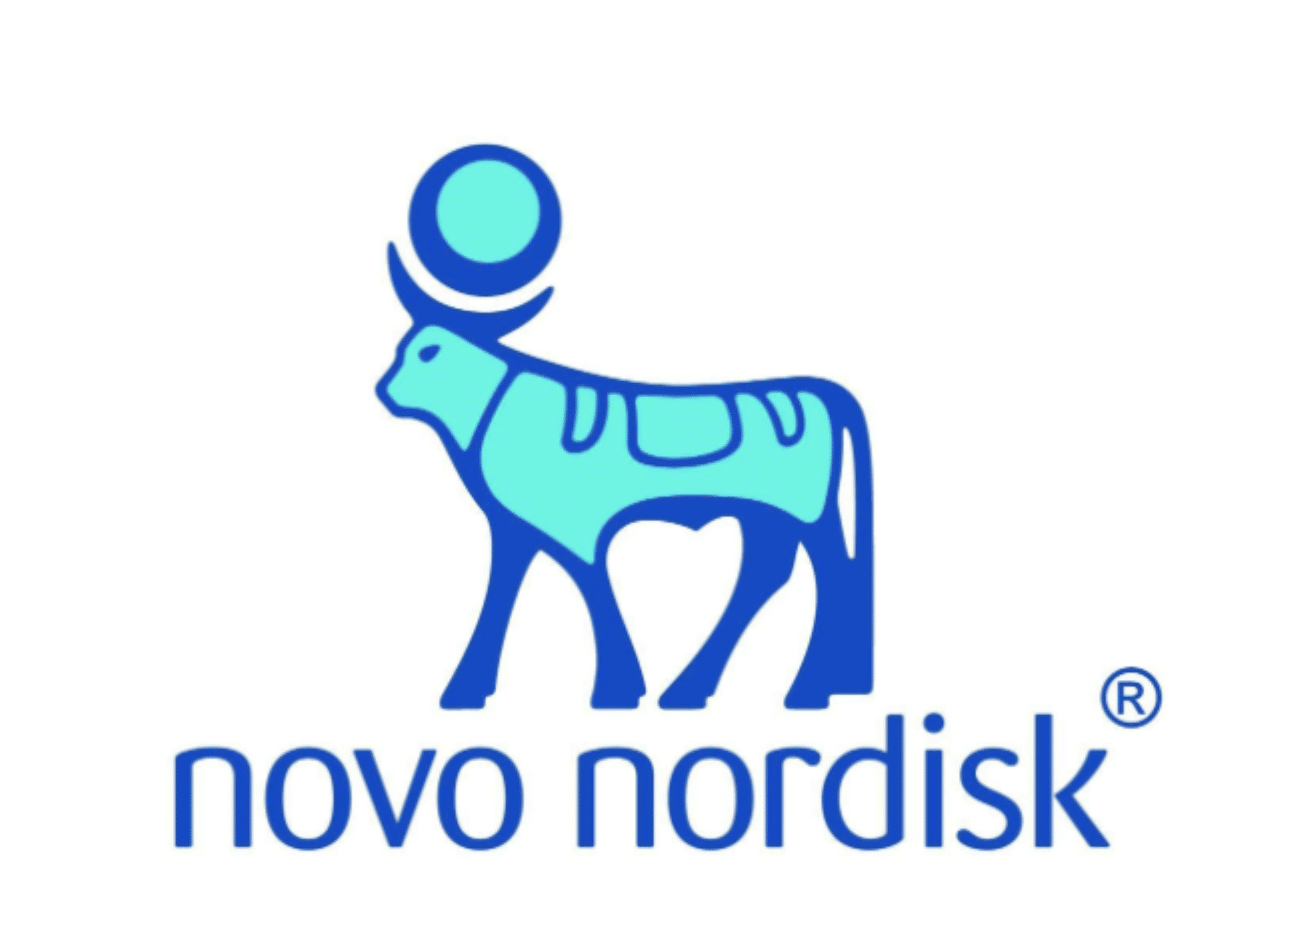 Novo Nordisk surpasses LVMH and becomes Europe's most valuable